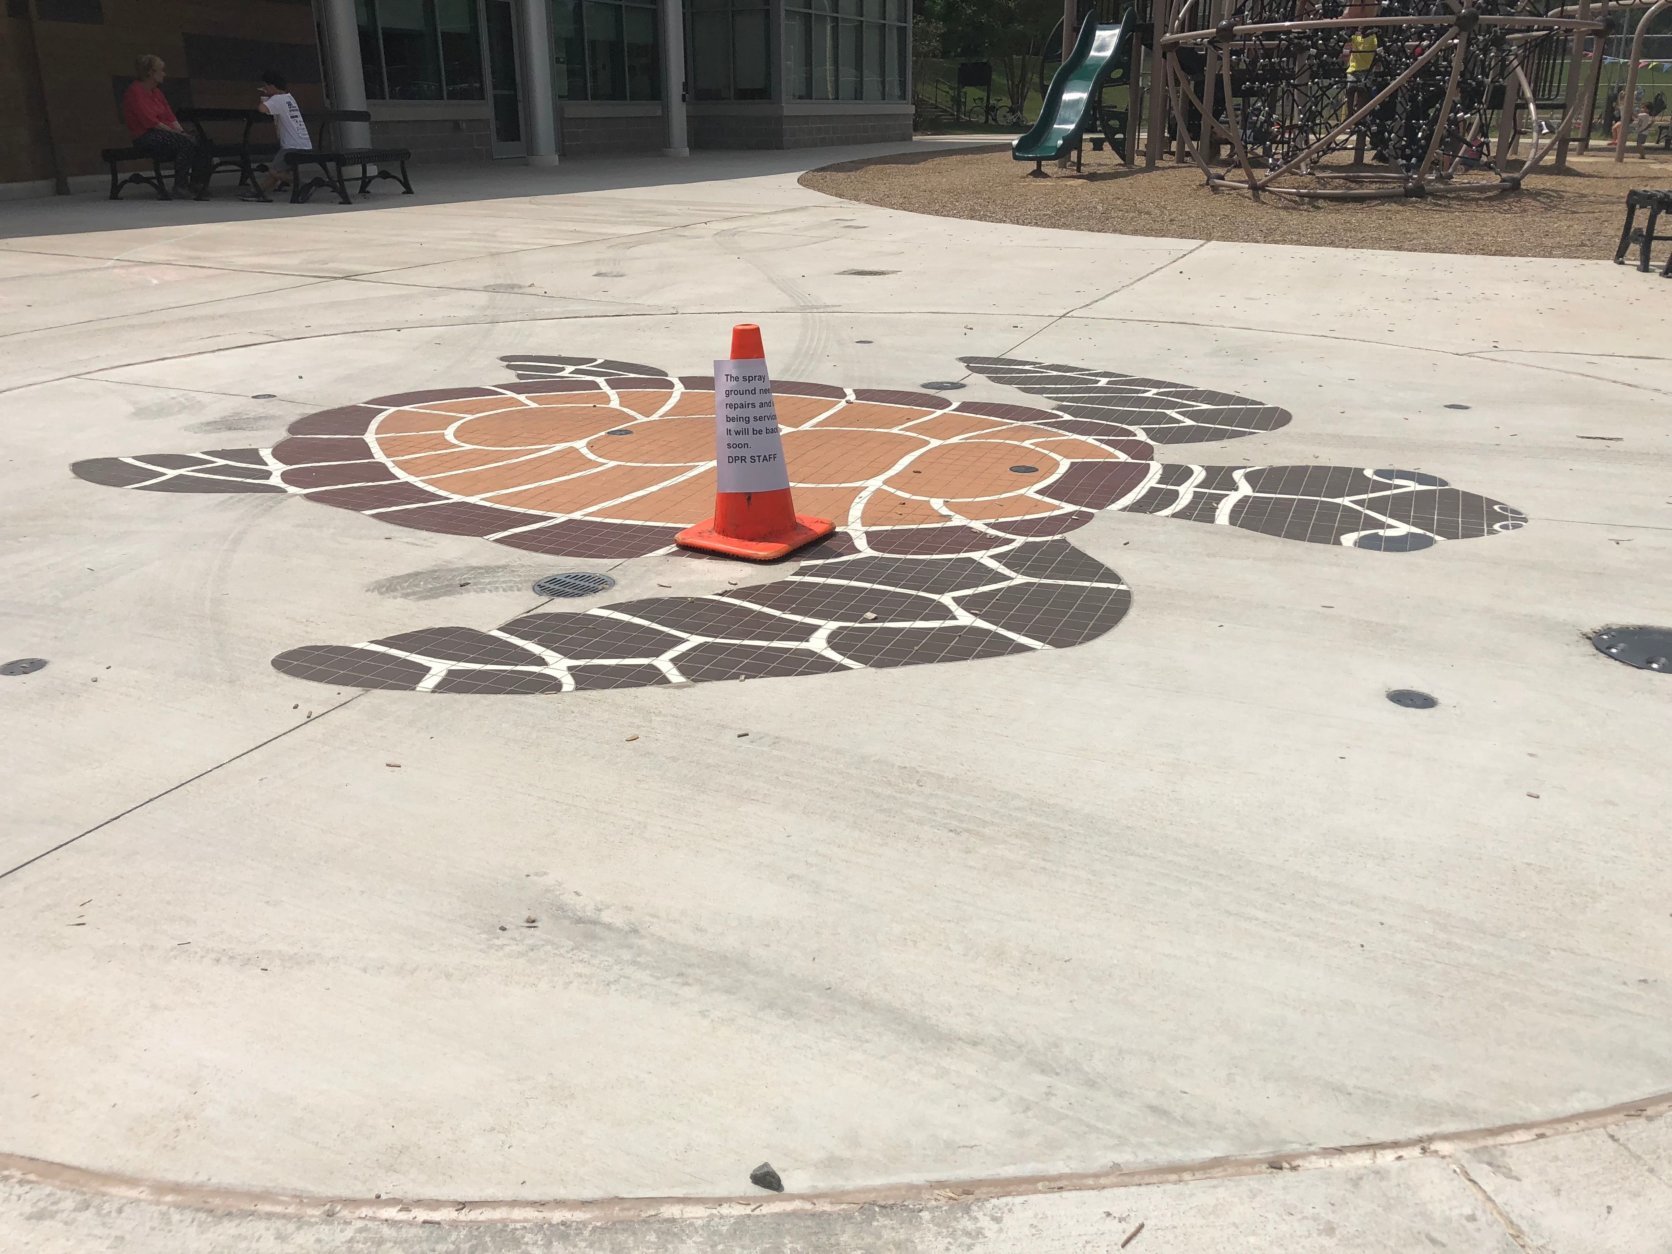 The splash pad, which normally sprays water for children to play in, has been closed while officials try to fix the reports of sewage contamination in the water. (WTOP/Melissa Howell)